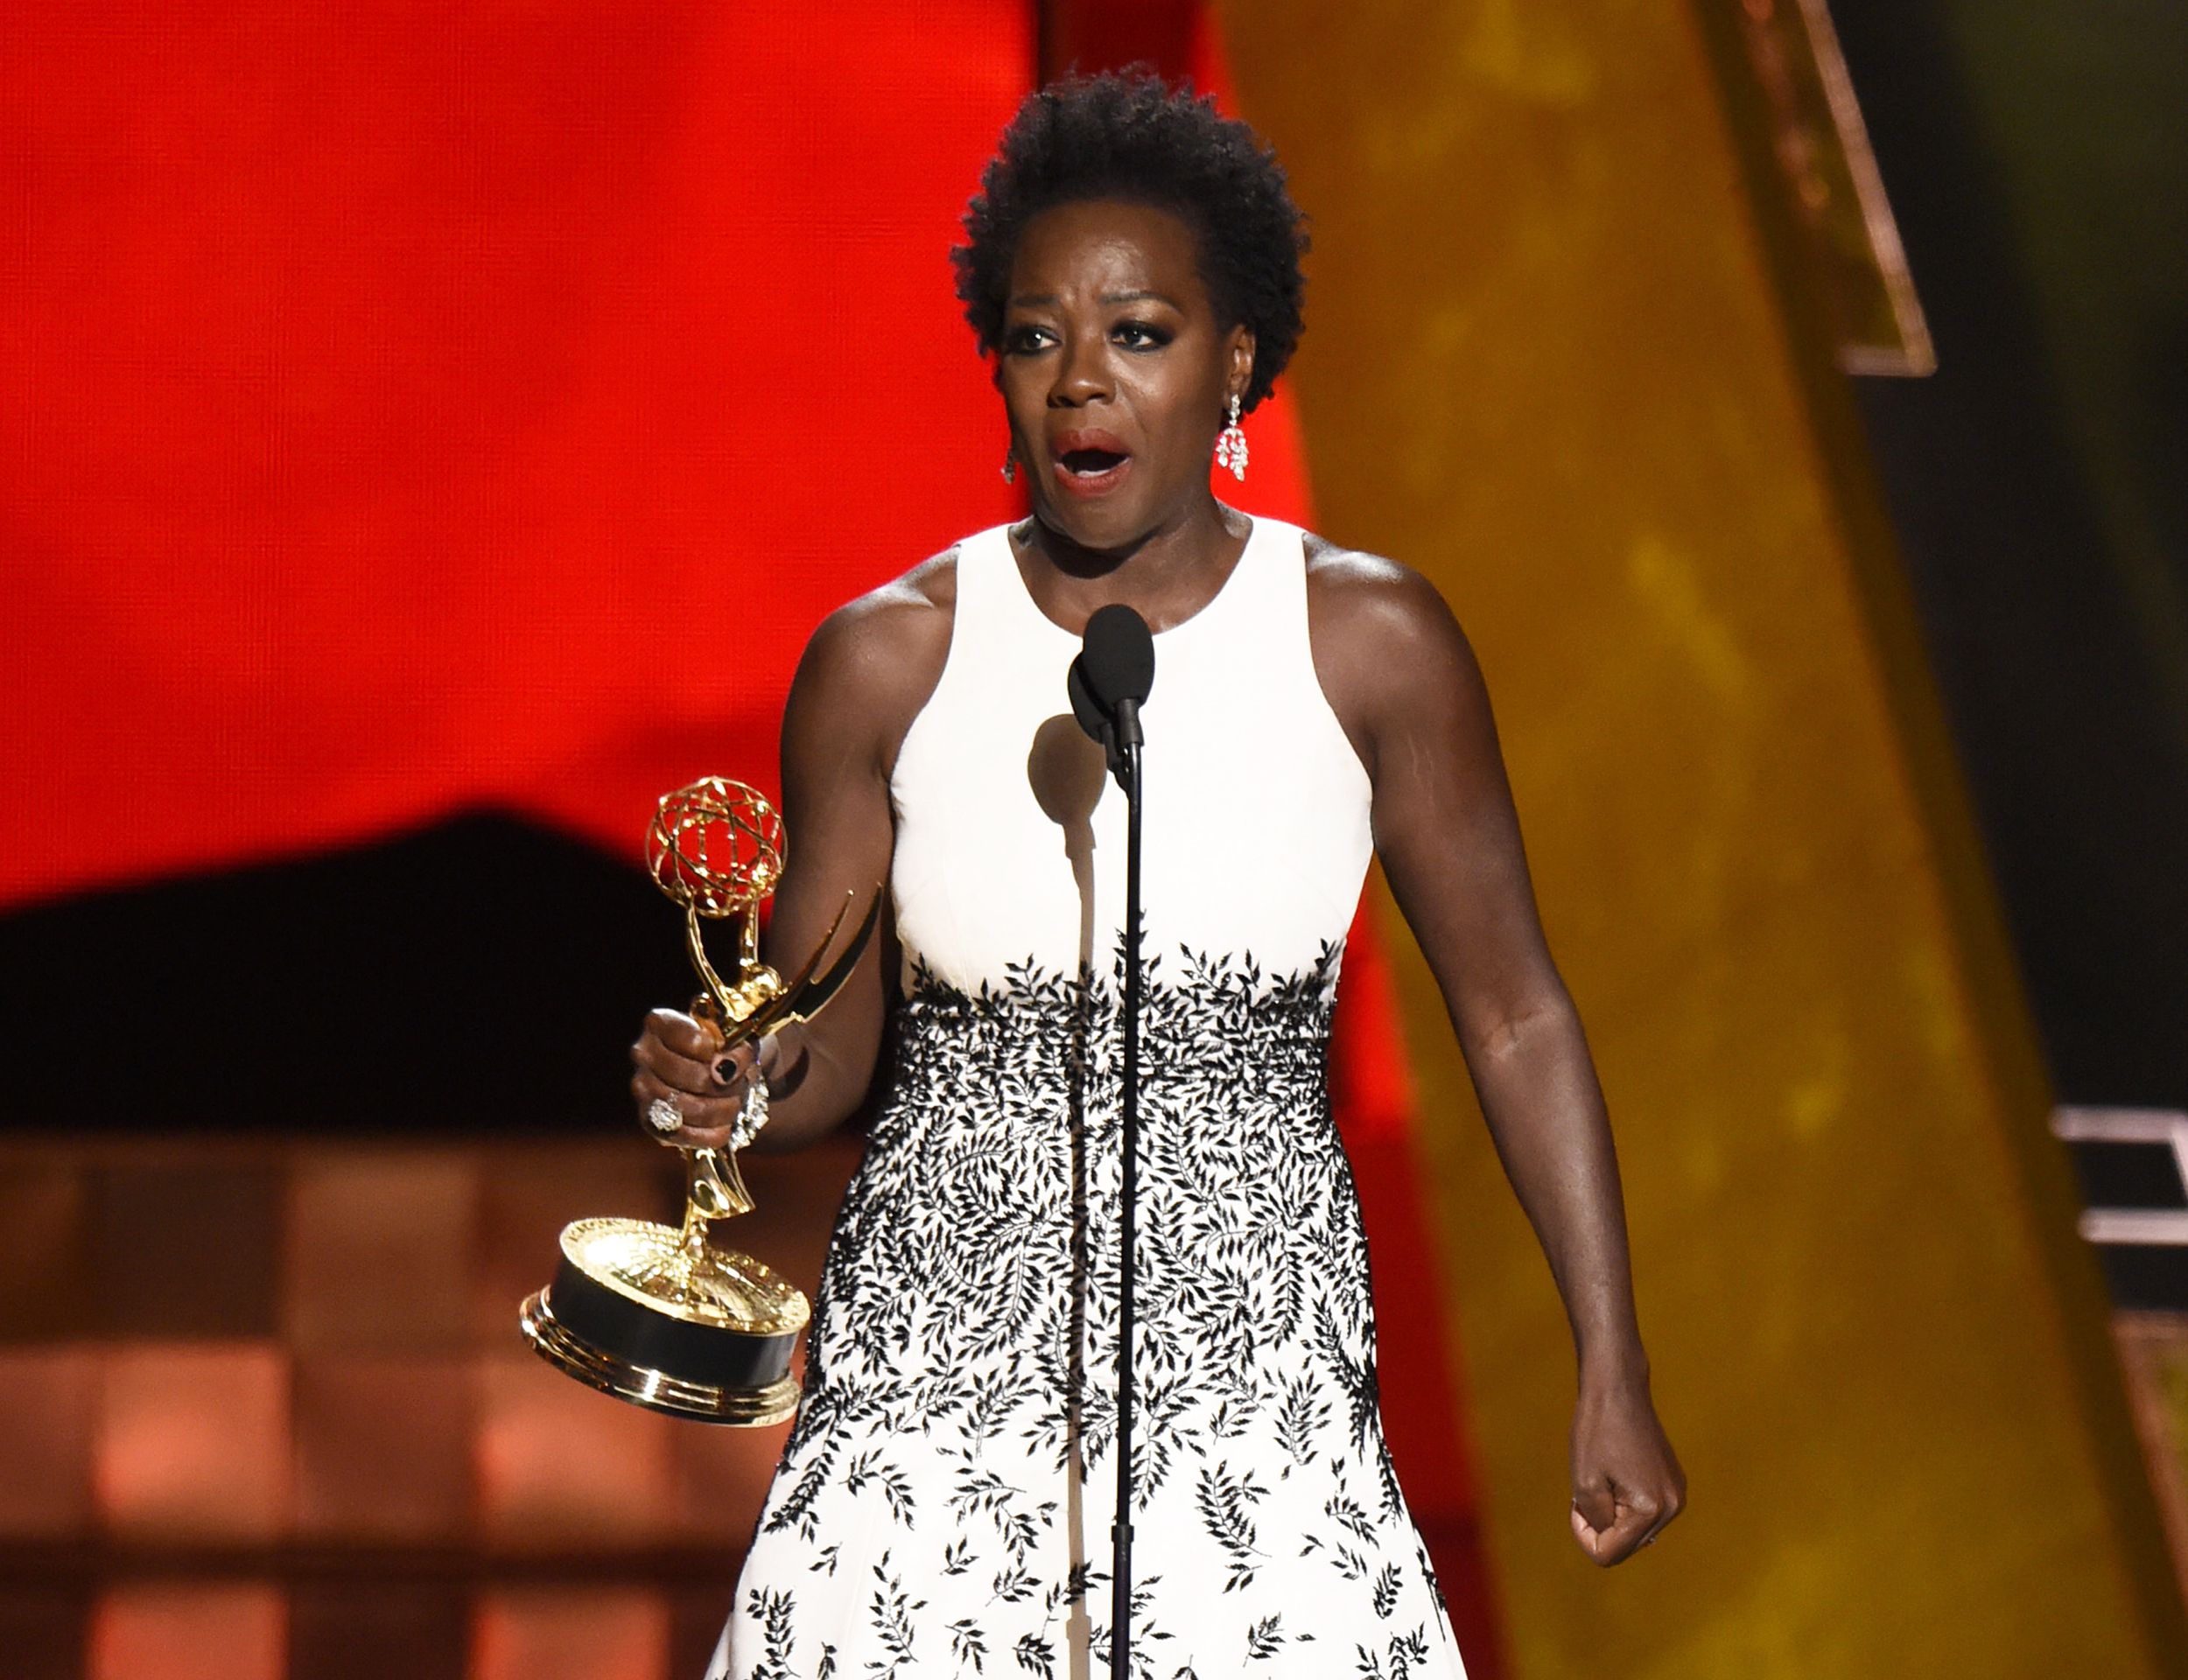 Viola Davis delivers an impassioned speech as she accepts the Emmy award for outstanding lead actress in a drama series for “How to Get Away With Murder." Davis is the first African-American woman to win the award. (AP)